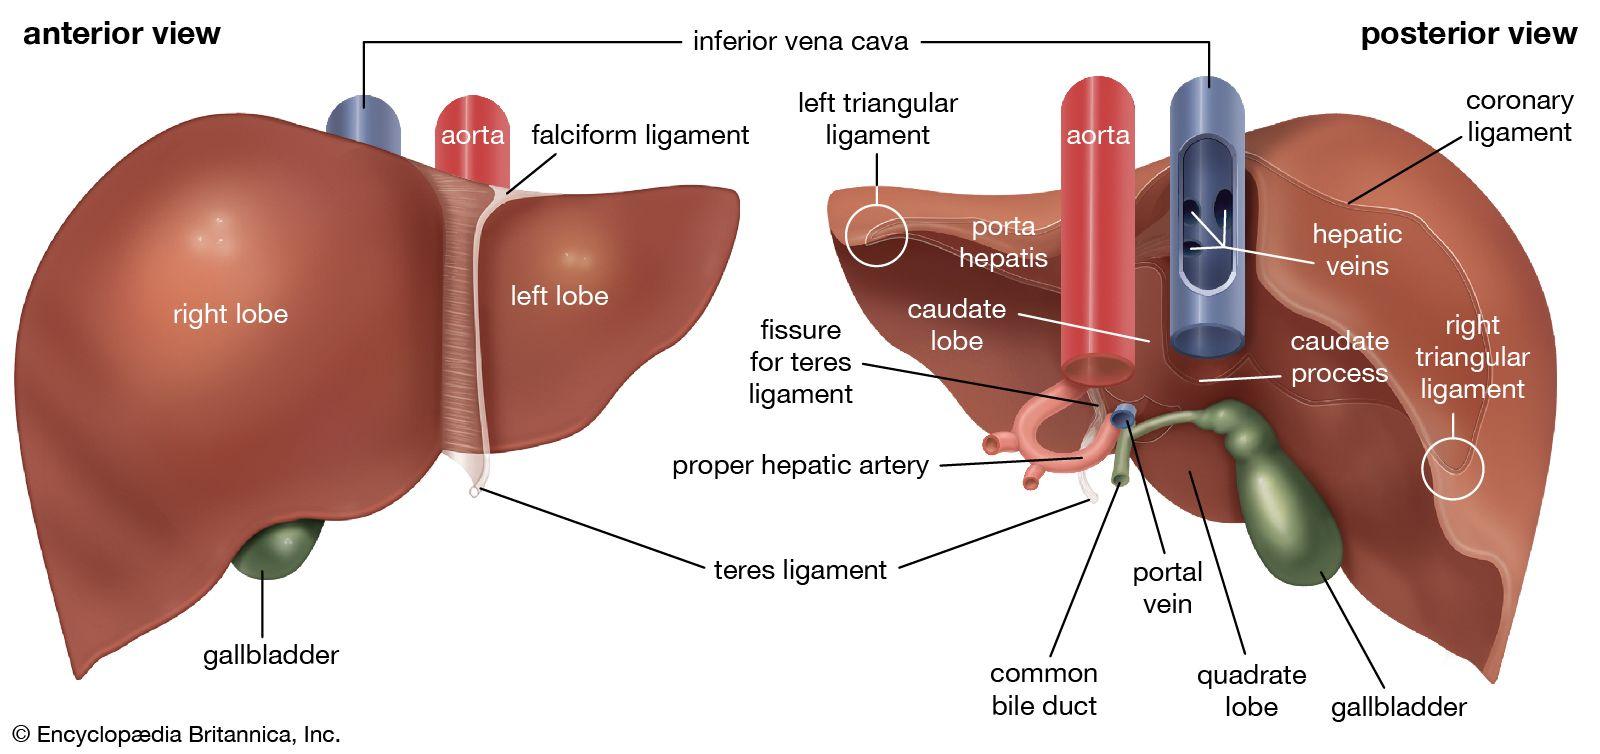 the anterior and the posterior view of the liver